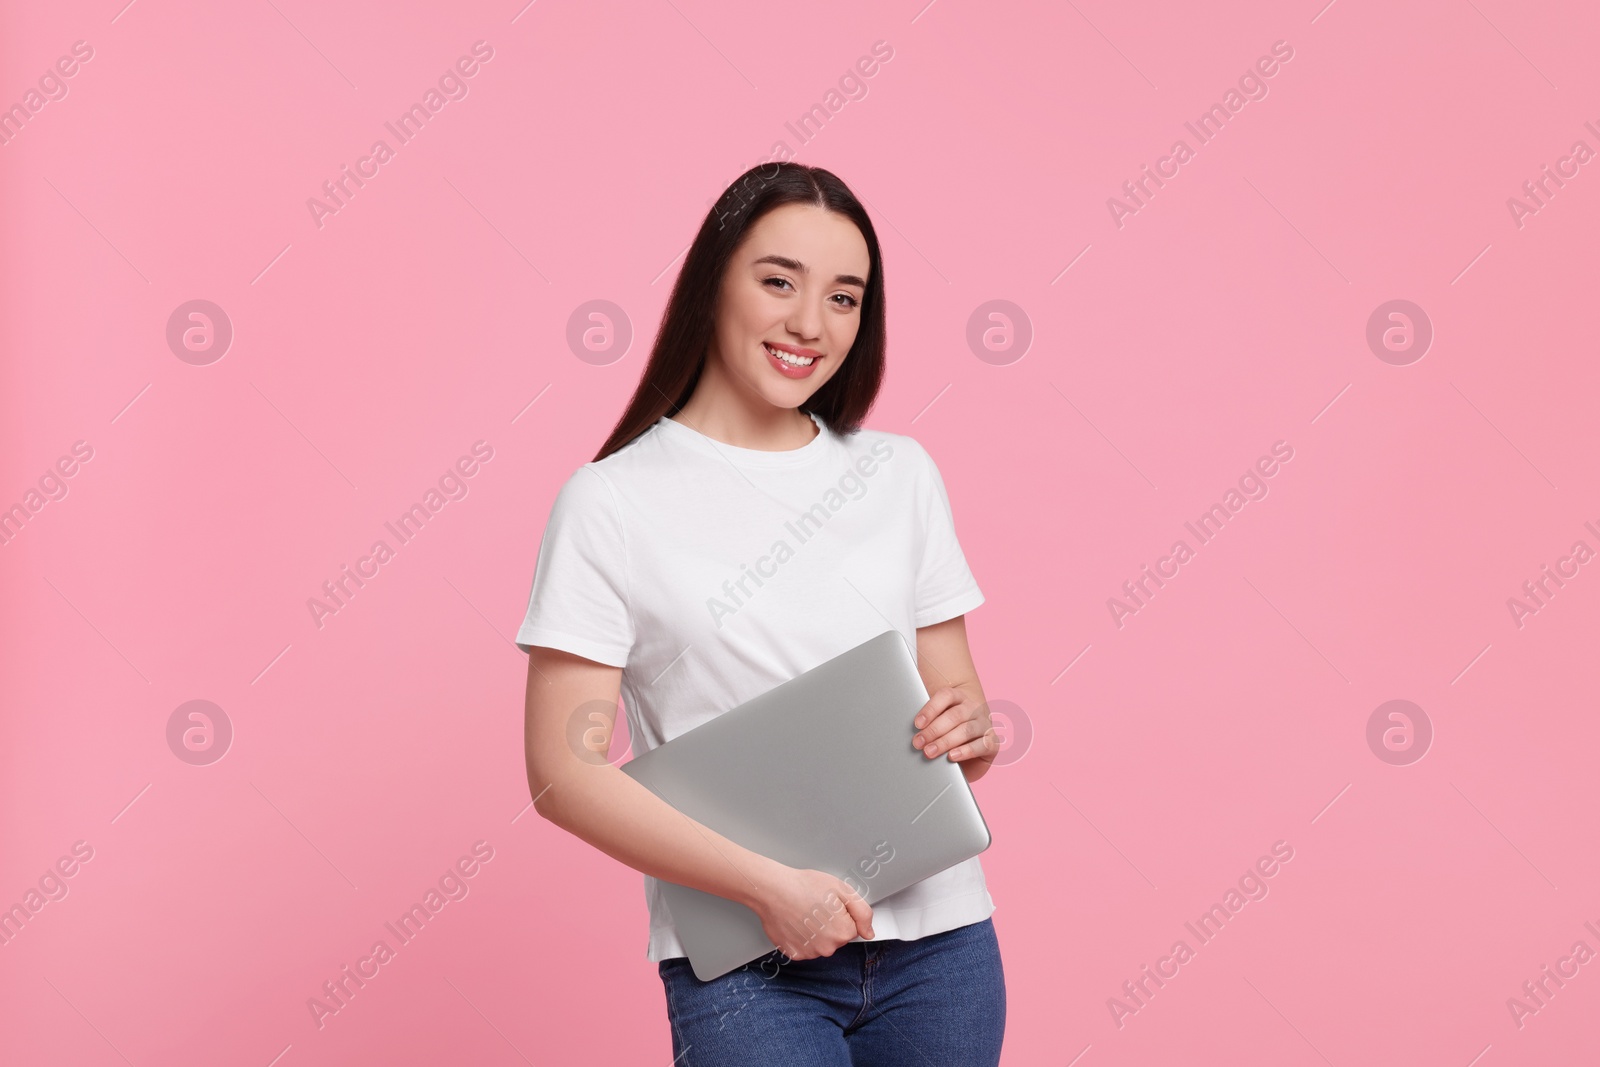 Photo of Smiling young woman with laptop on pink background